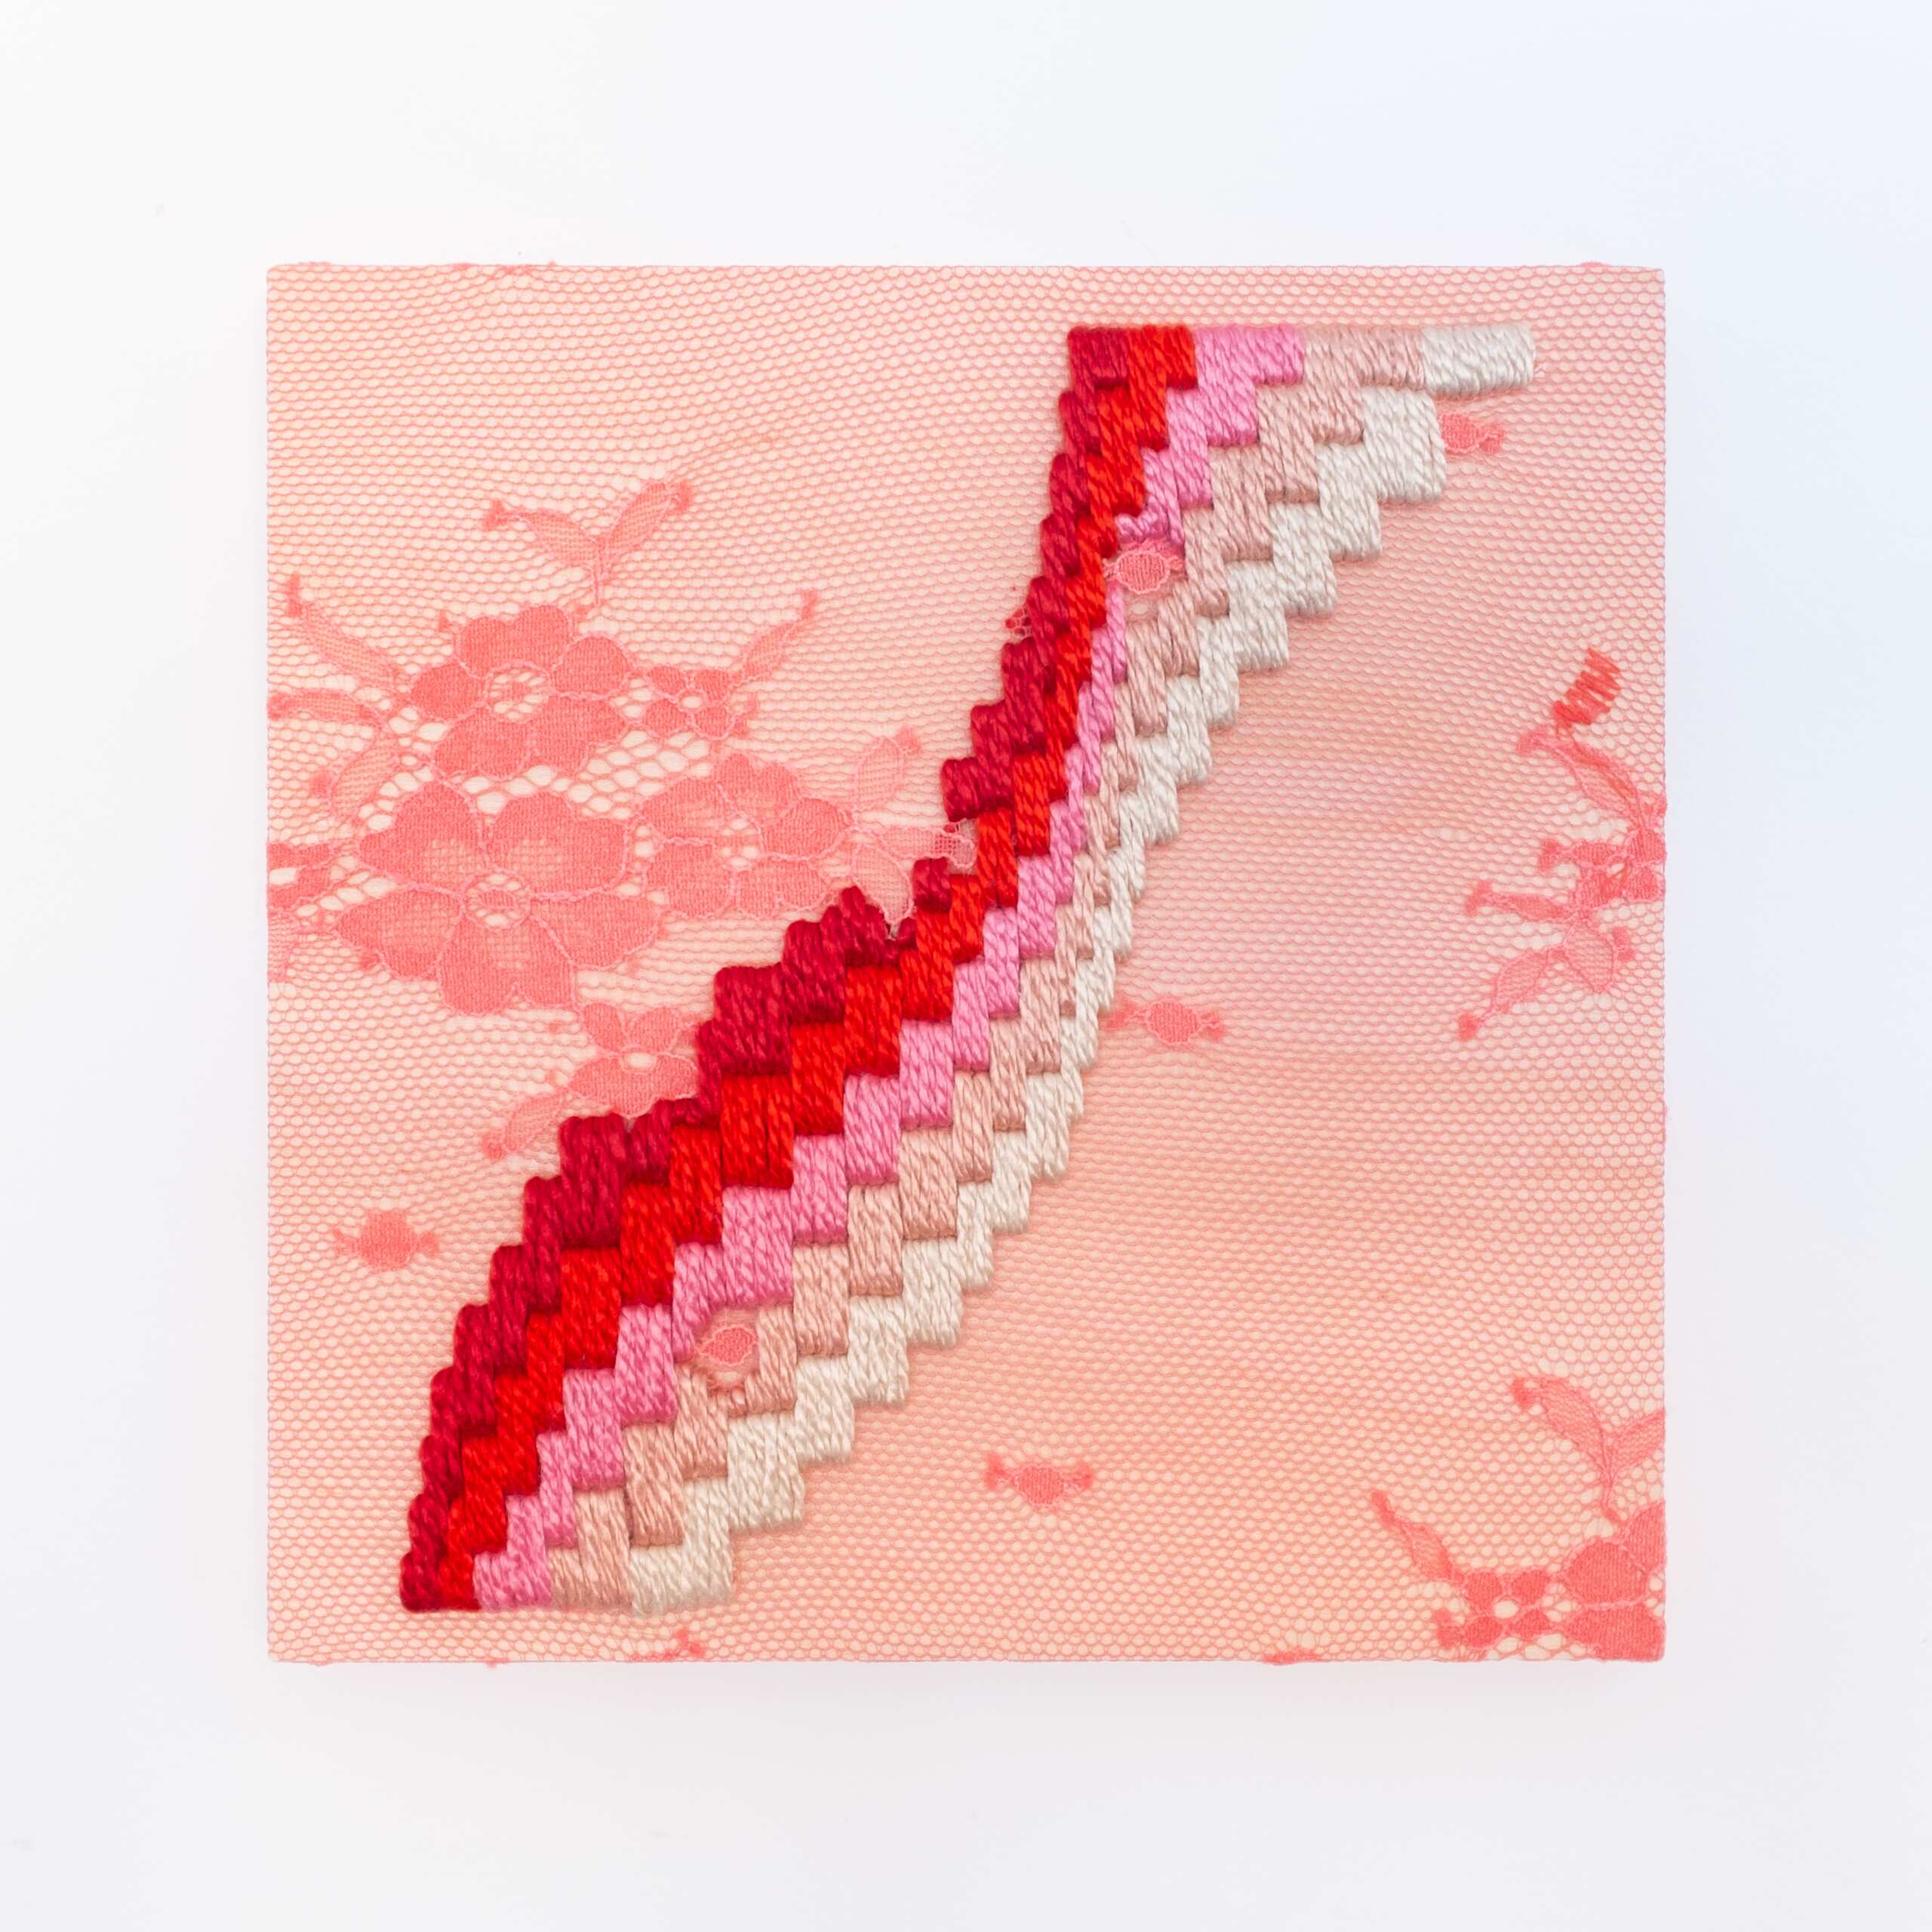 Get a Wiggle on [red], Hand-embroidered silk on lace over plywood panel, 2020